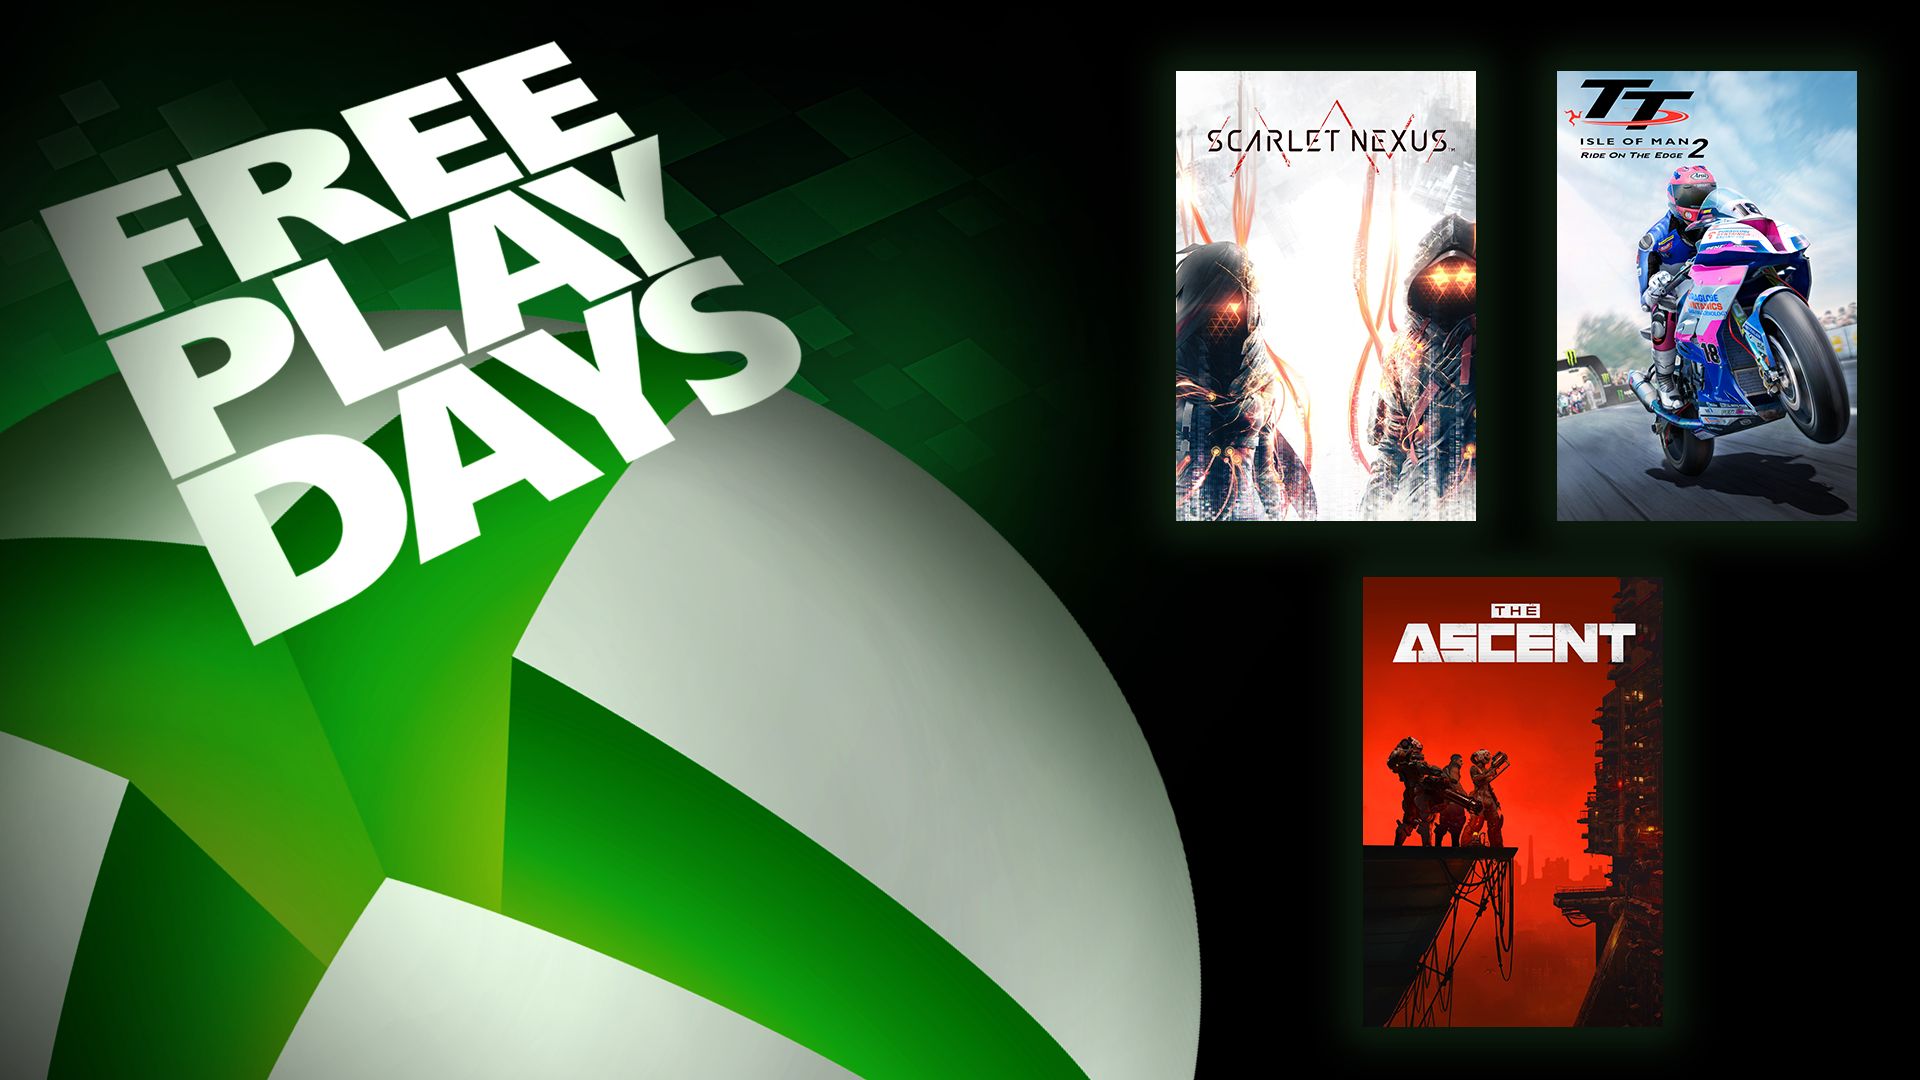 Free Play Days – Scarlet Nexus, TT Isle of Man Ride on the Edge 2, and The Ascent